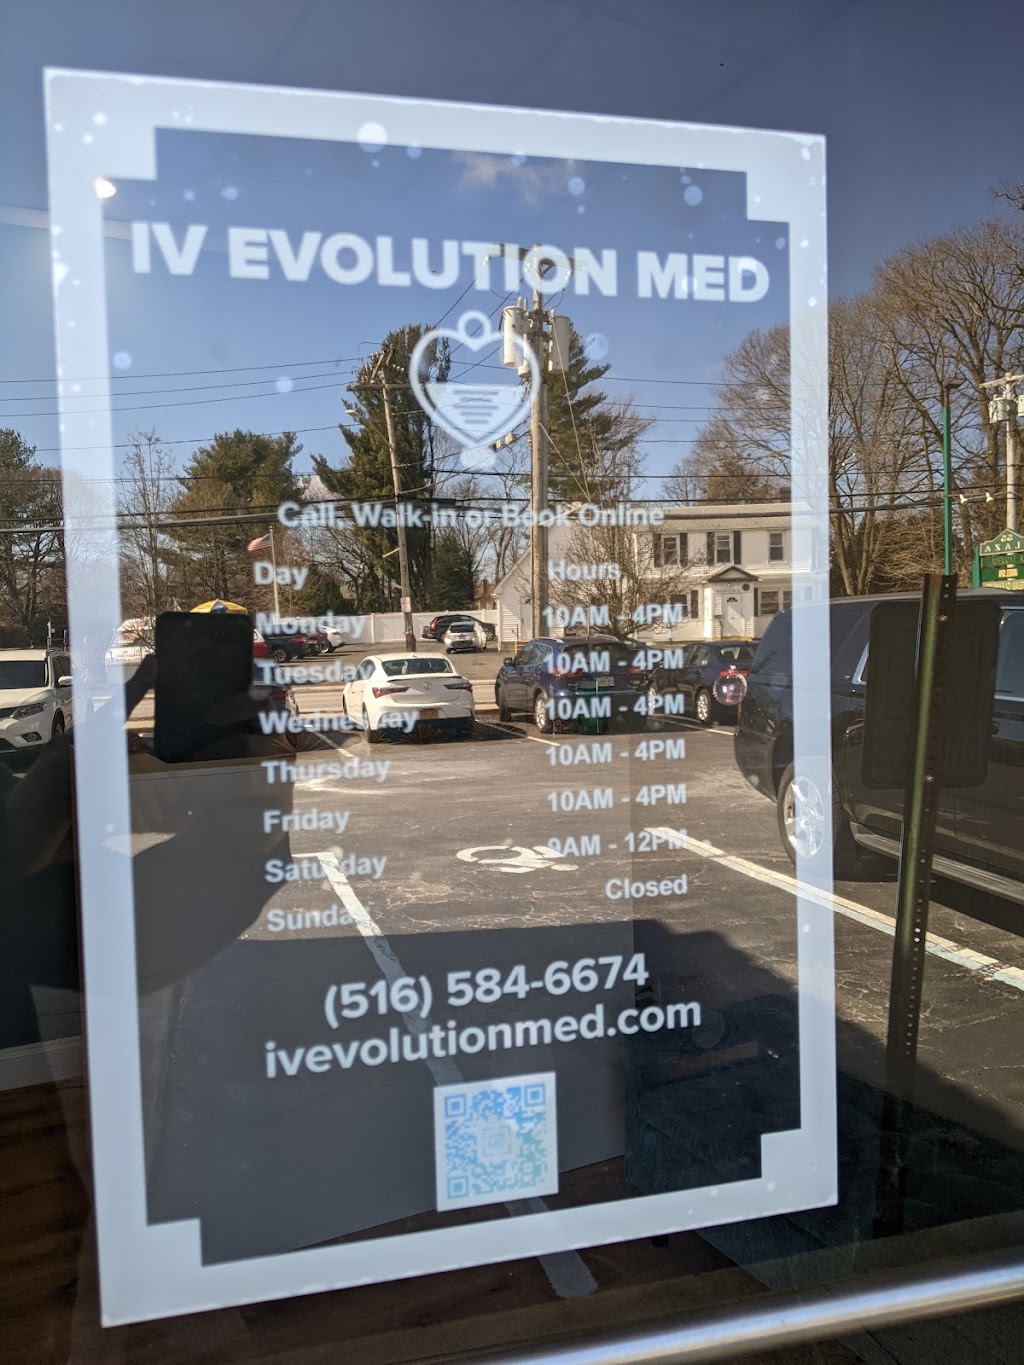 IV Evolution Medical | 65 Berry Hill Rd, Syosset, NY 11791 | Phone: (516) 963-8658